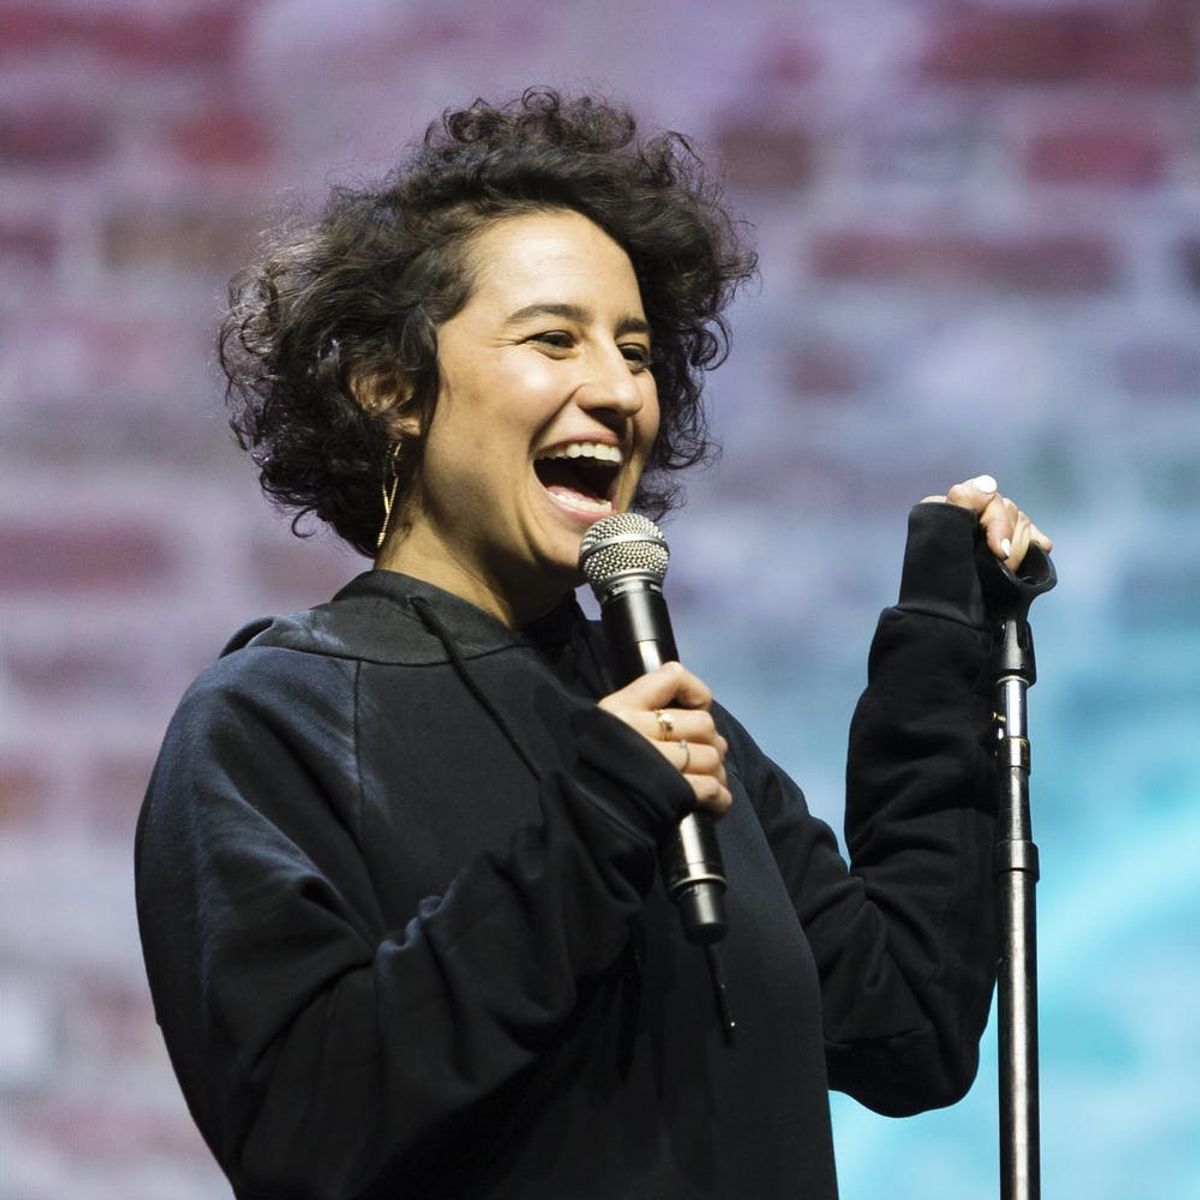 Broad City + Other Comics Bring the Laughs to Comedy Central’s Colossal Clusterfest